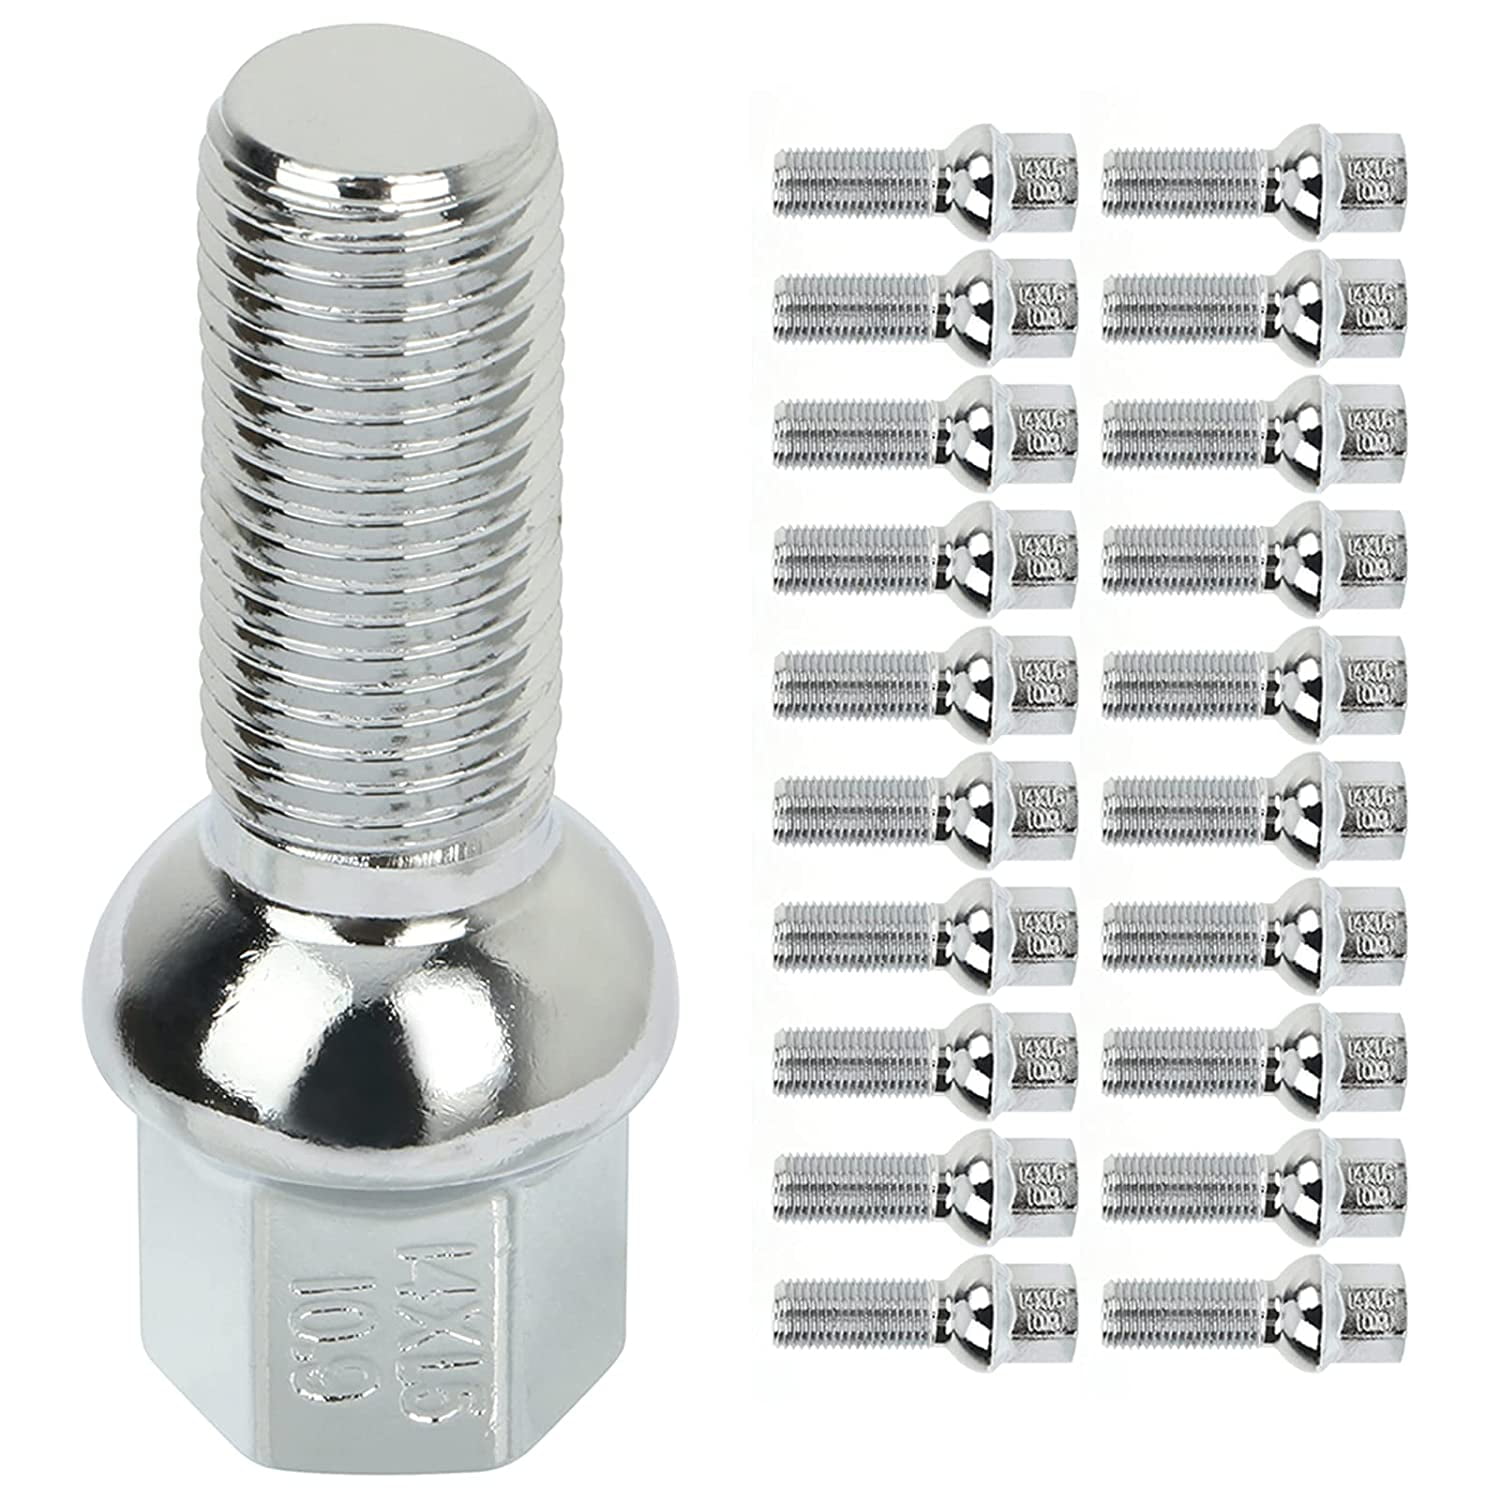 SCITOO Wheel Bolt 14x1.5 20 Pieces Silver Shank Length 33 mm Compatible with Audi 100 200 4000 A4 A5 A6 